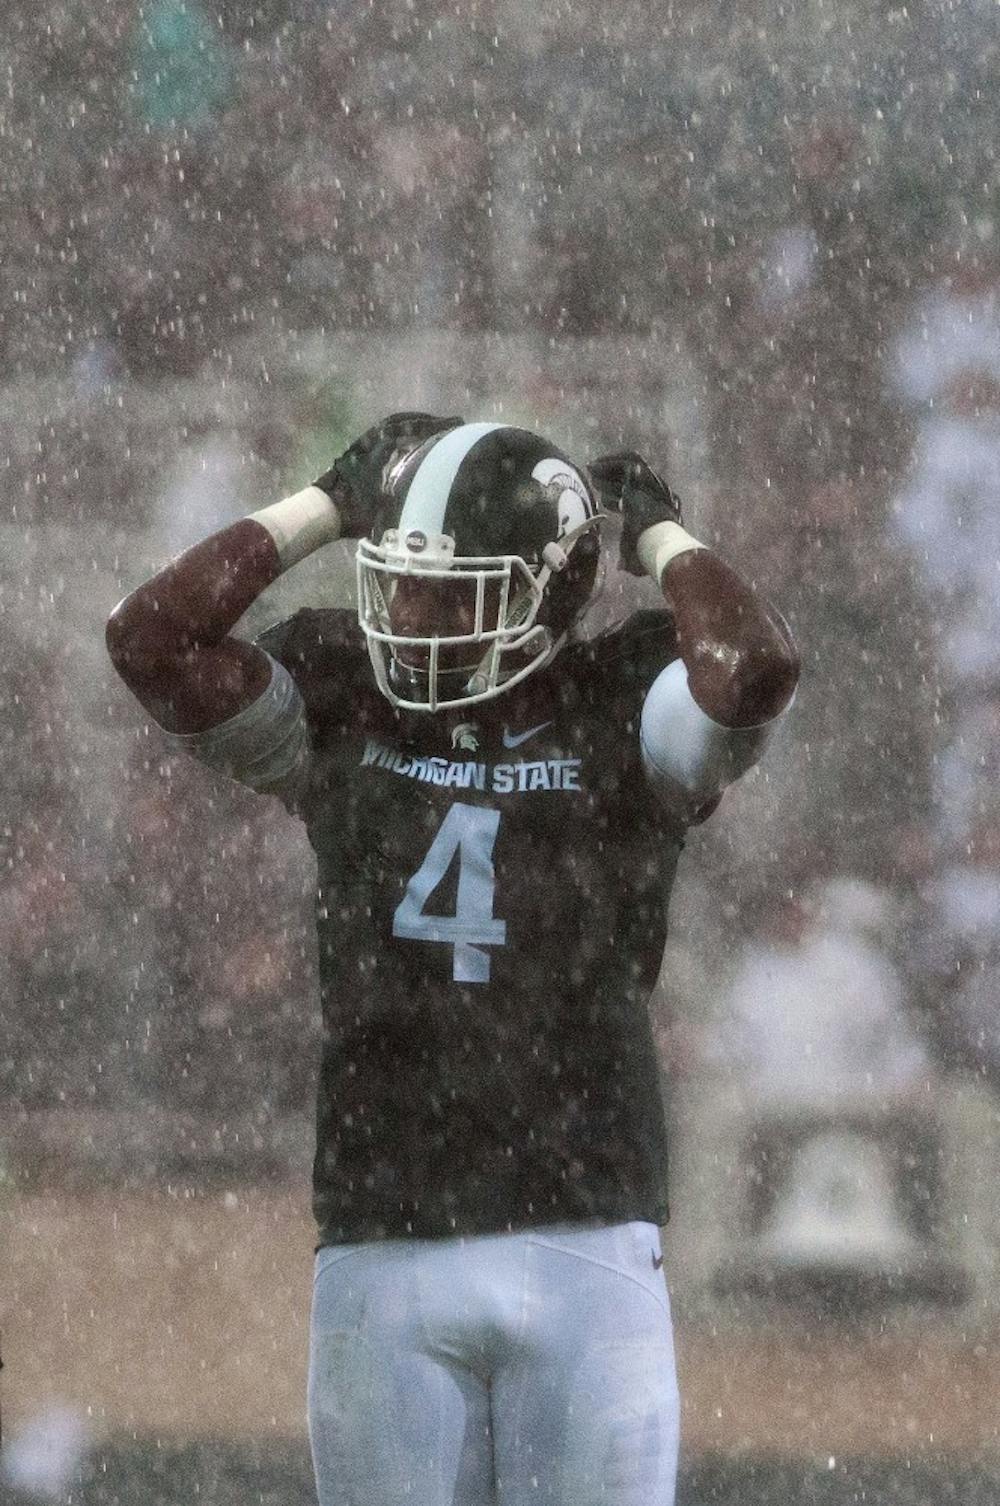 <p>Sophomore defensive lineman Malik McDowell tries to pump up the crowd during a brief moment of hard rain during the game against Indiana on Oct. 24, 2015, at Spartan Stadium. The Spartans defeated the Hoosiers, 52-26.</p>